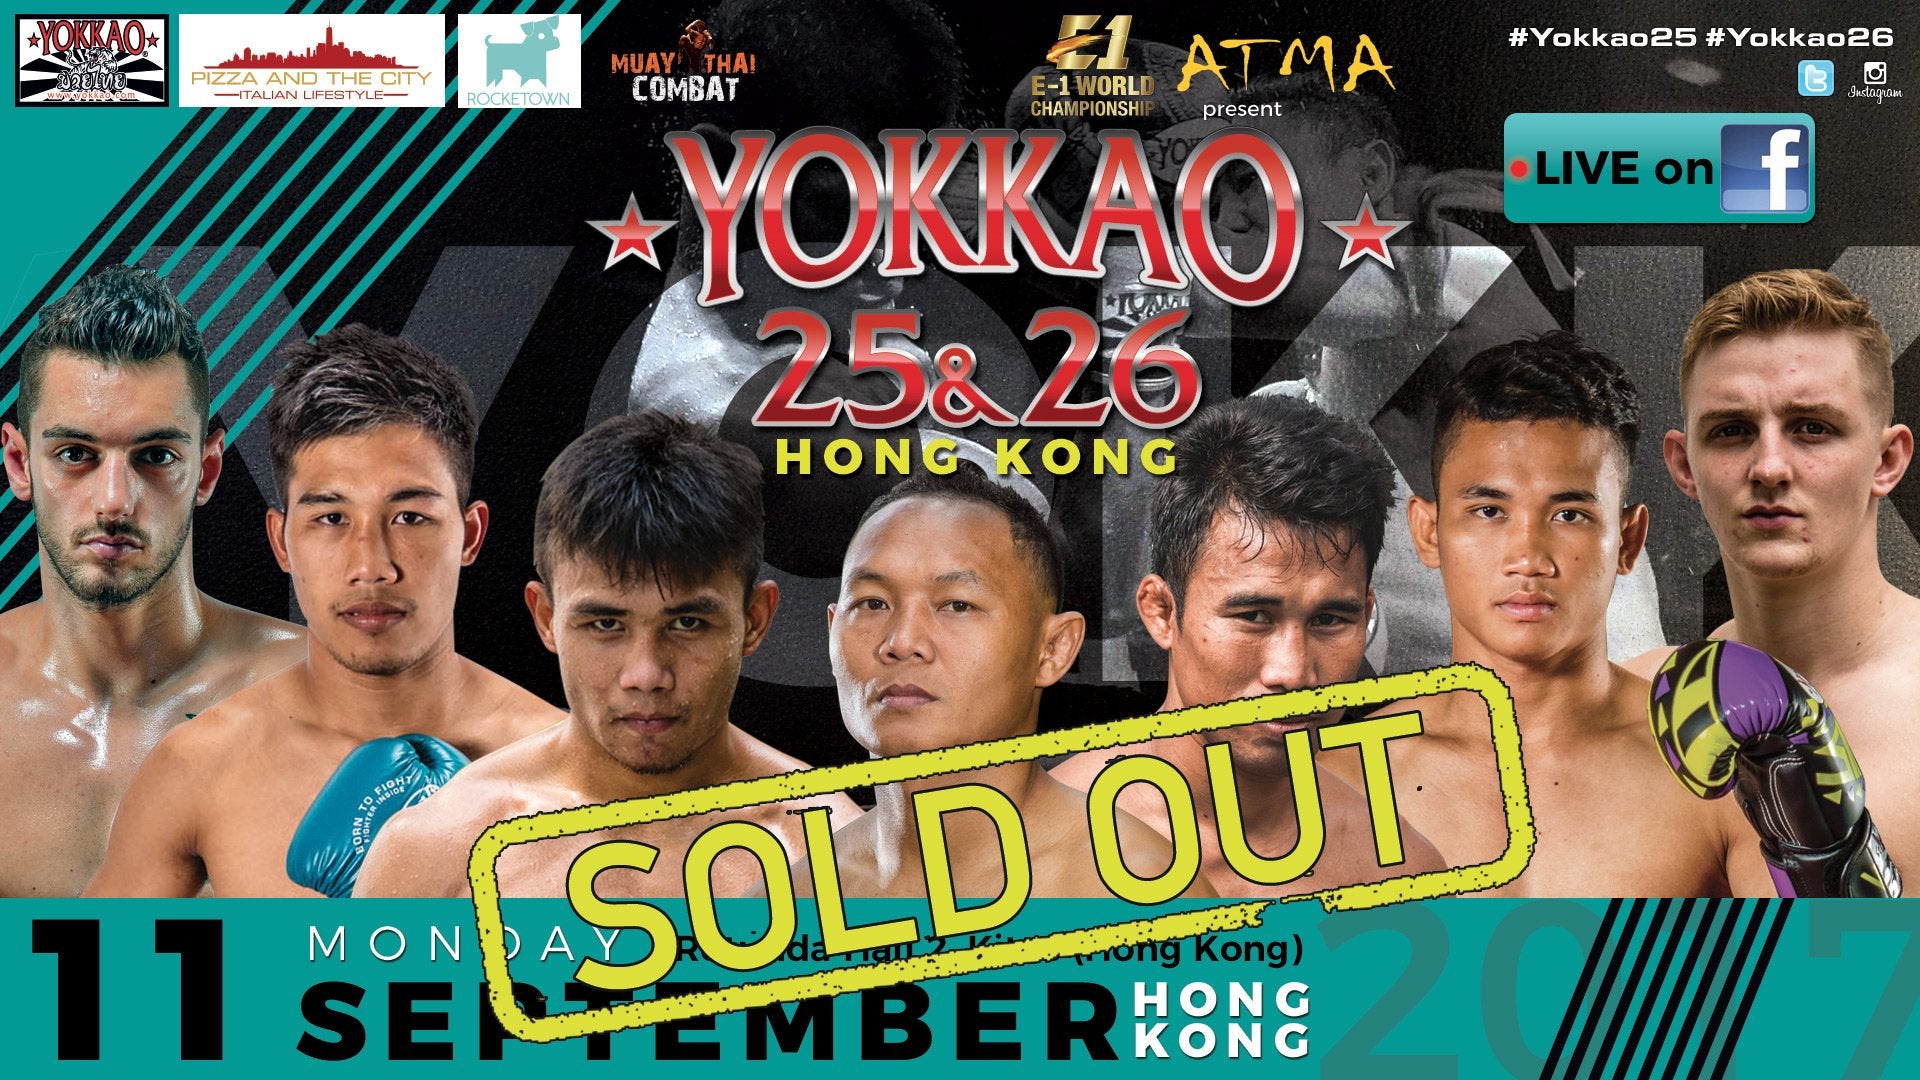 YOKKAO 25 26 is sold out!